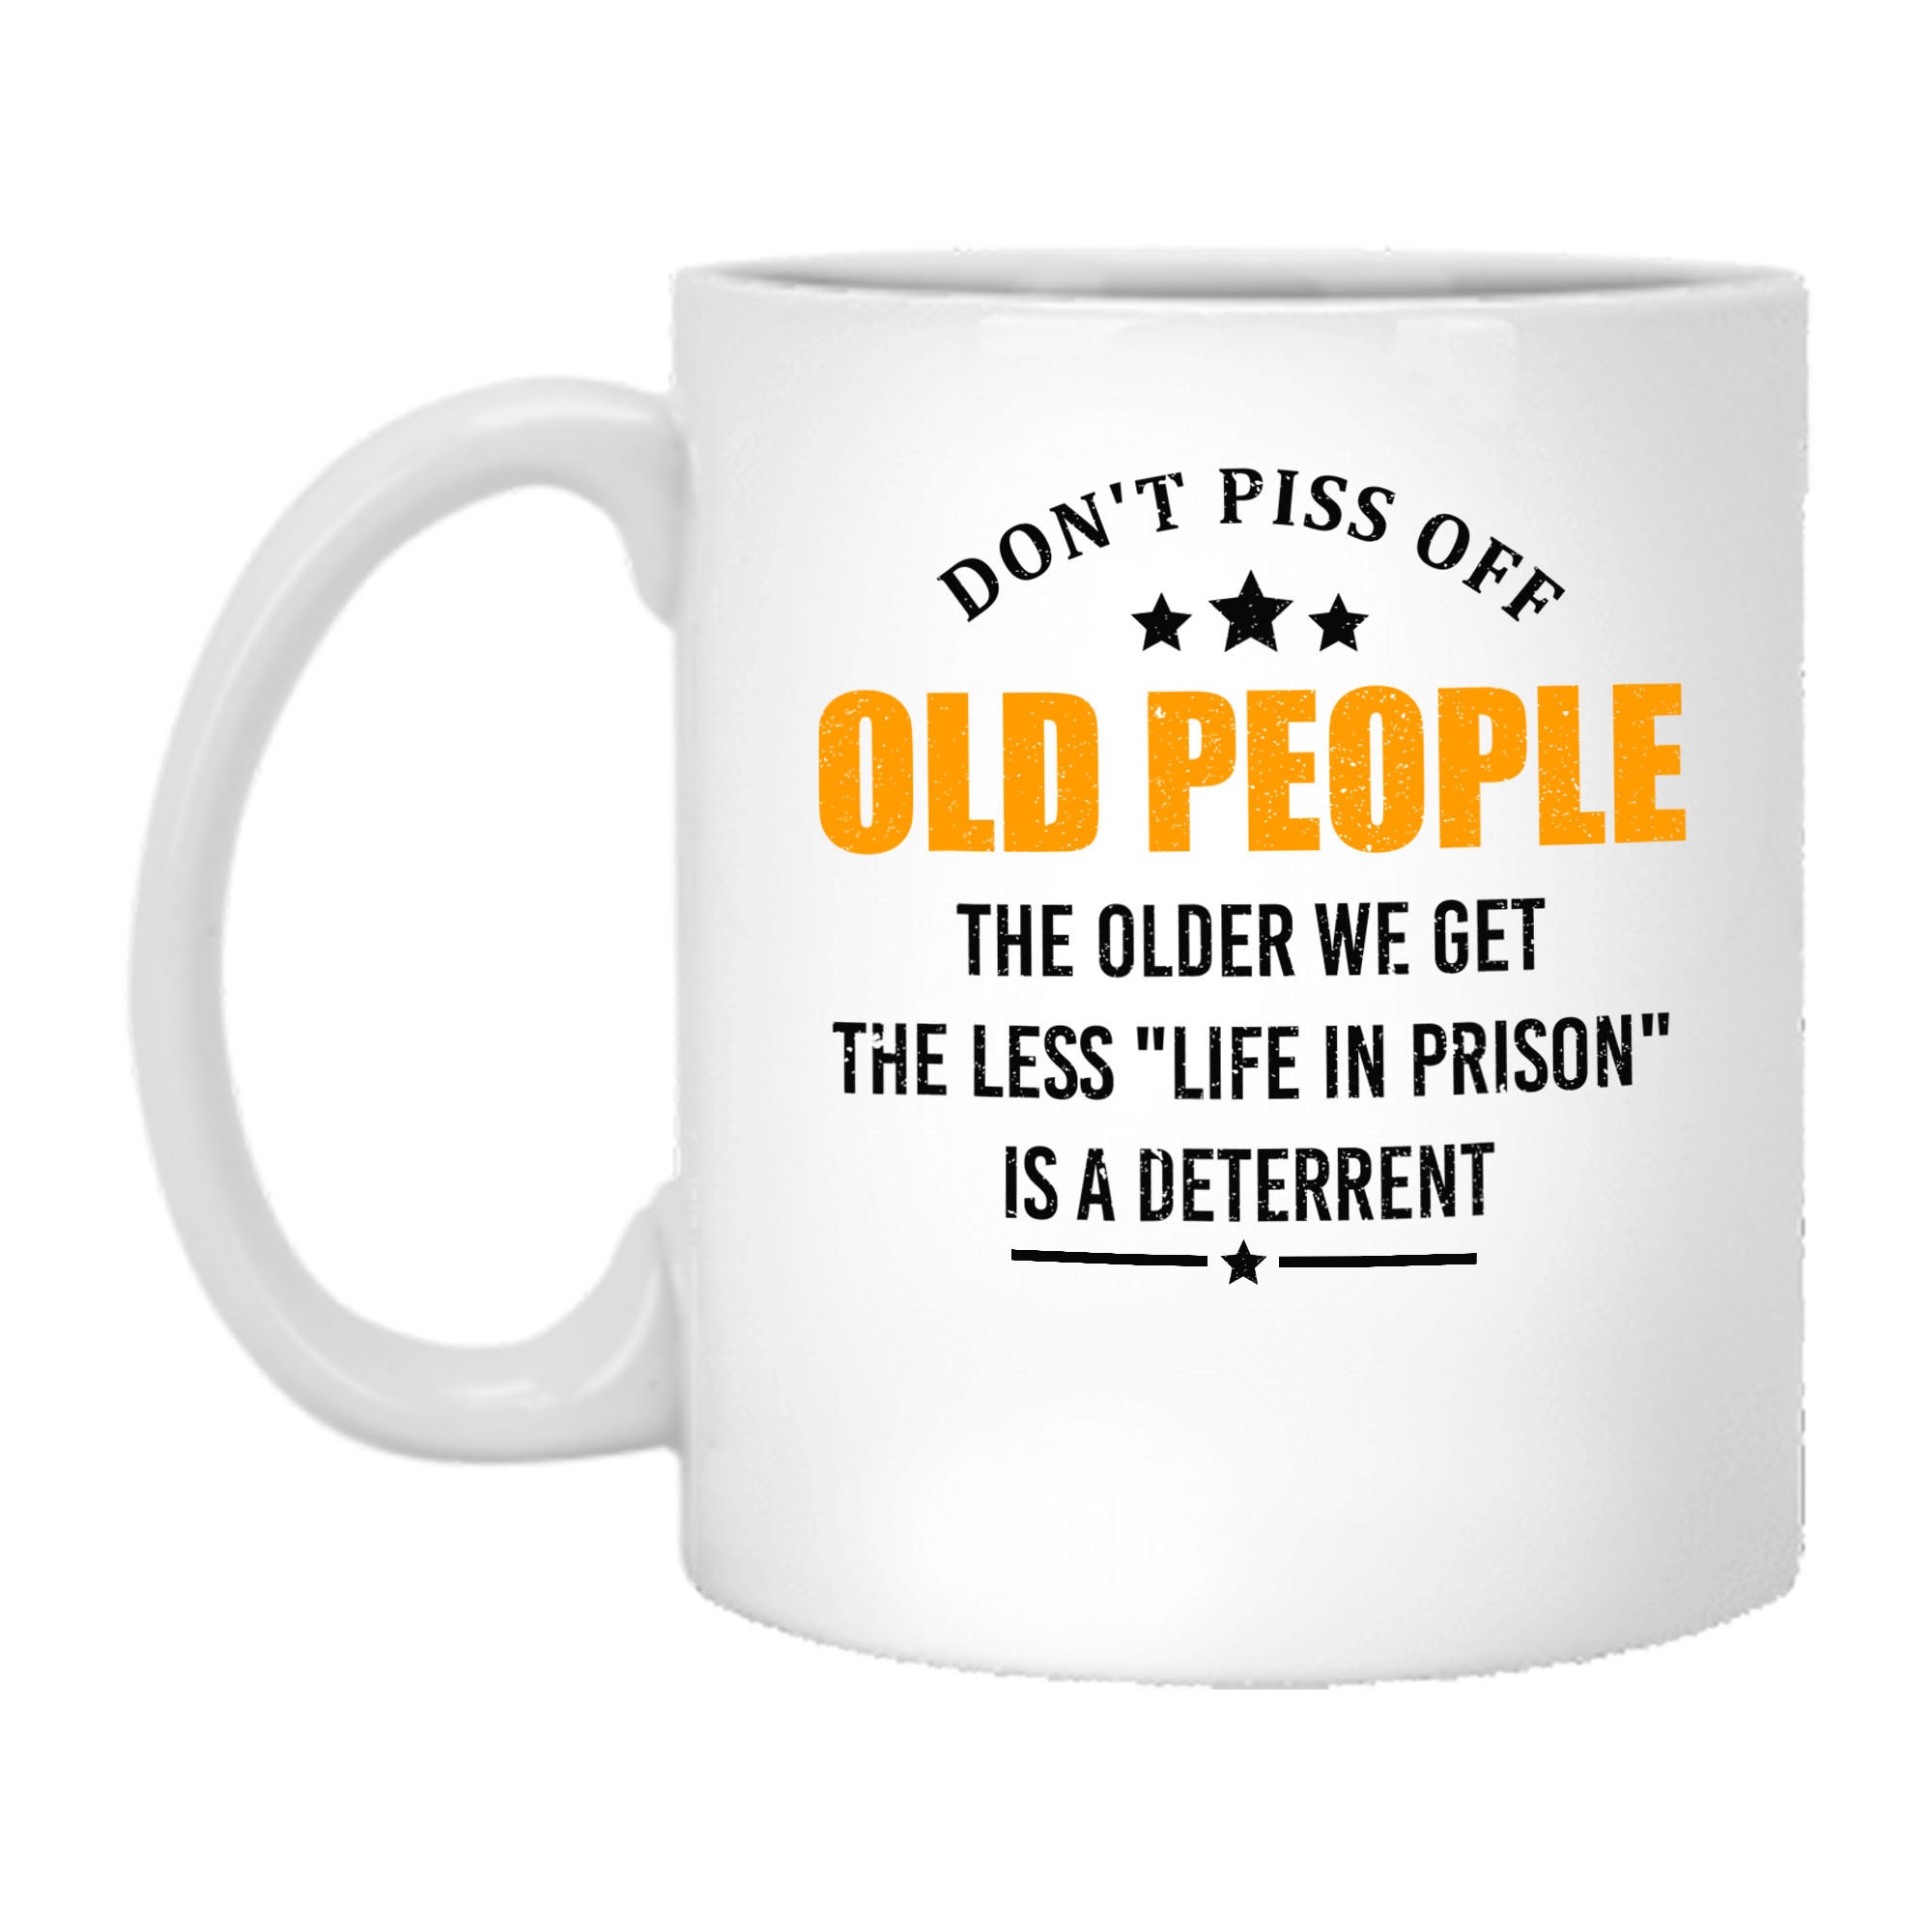  Funny Old People Gag Gifts for Elderly People Don't Piss Off  Old Funny Gag Gifts for Elderly People Throw Pillow, 18x18, Multicolor :  Home & Kitchen